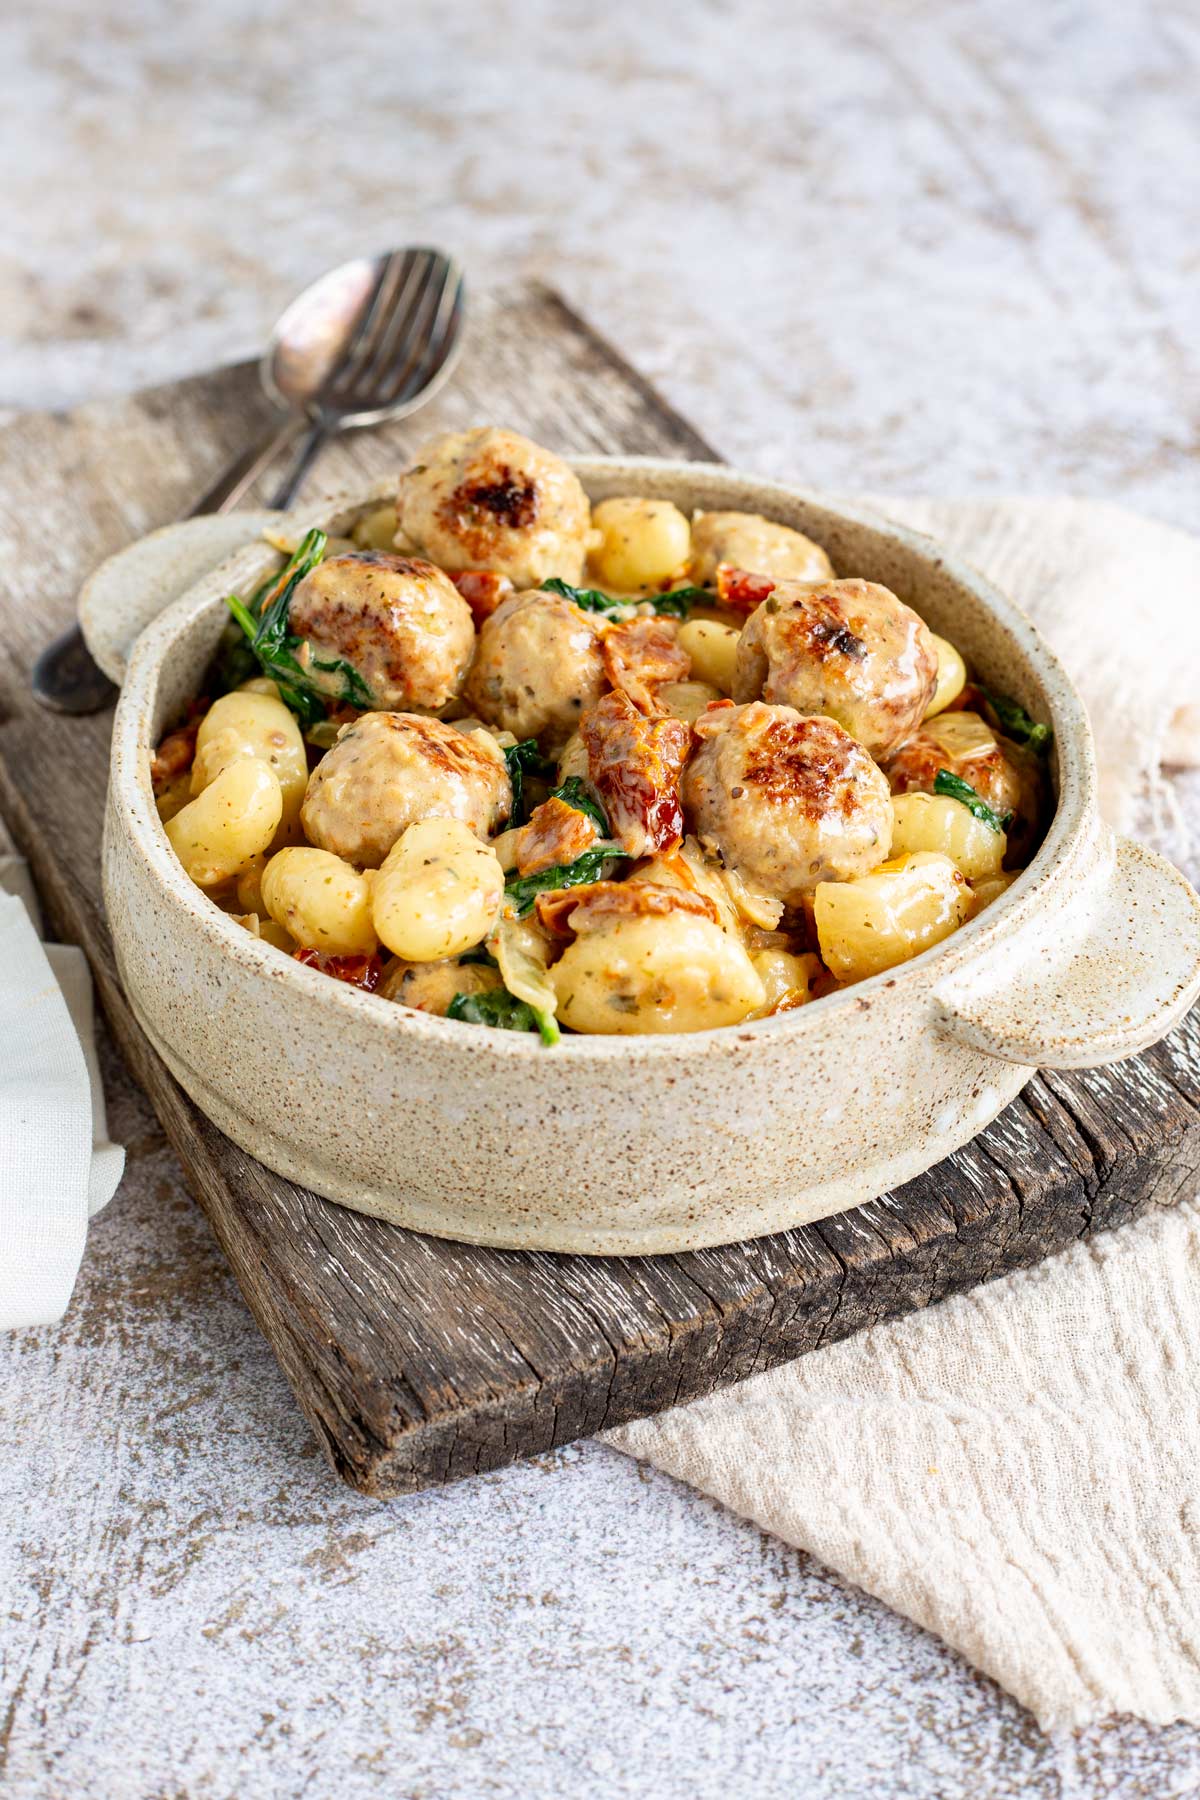 rustic dish with meatballs and gnocchi on a wooden board with a linen napkin